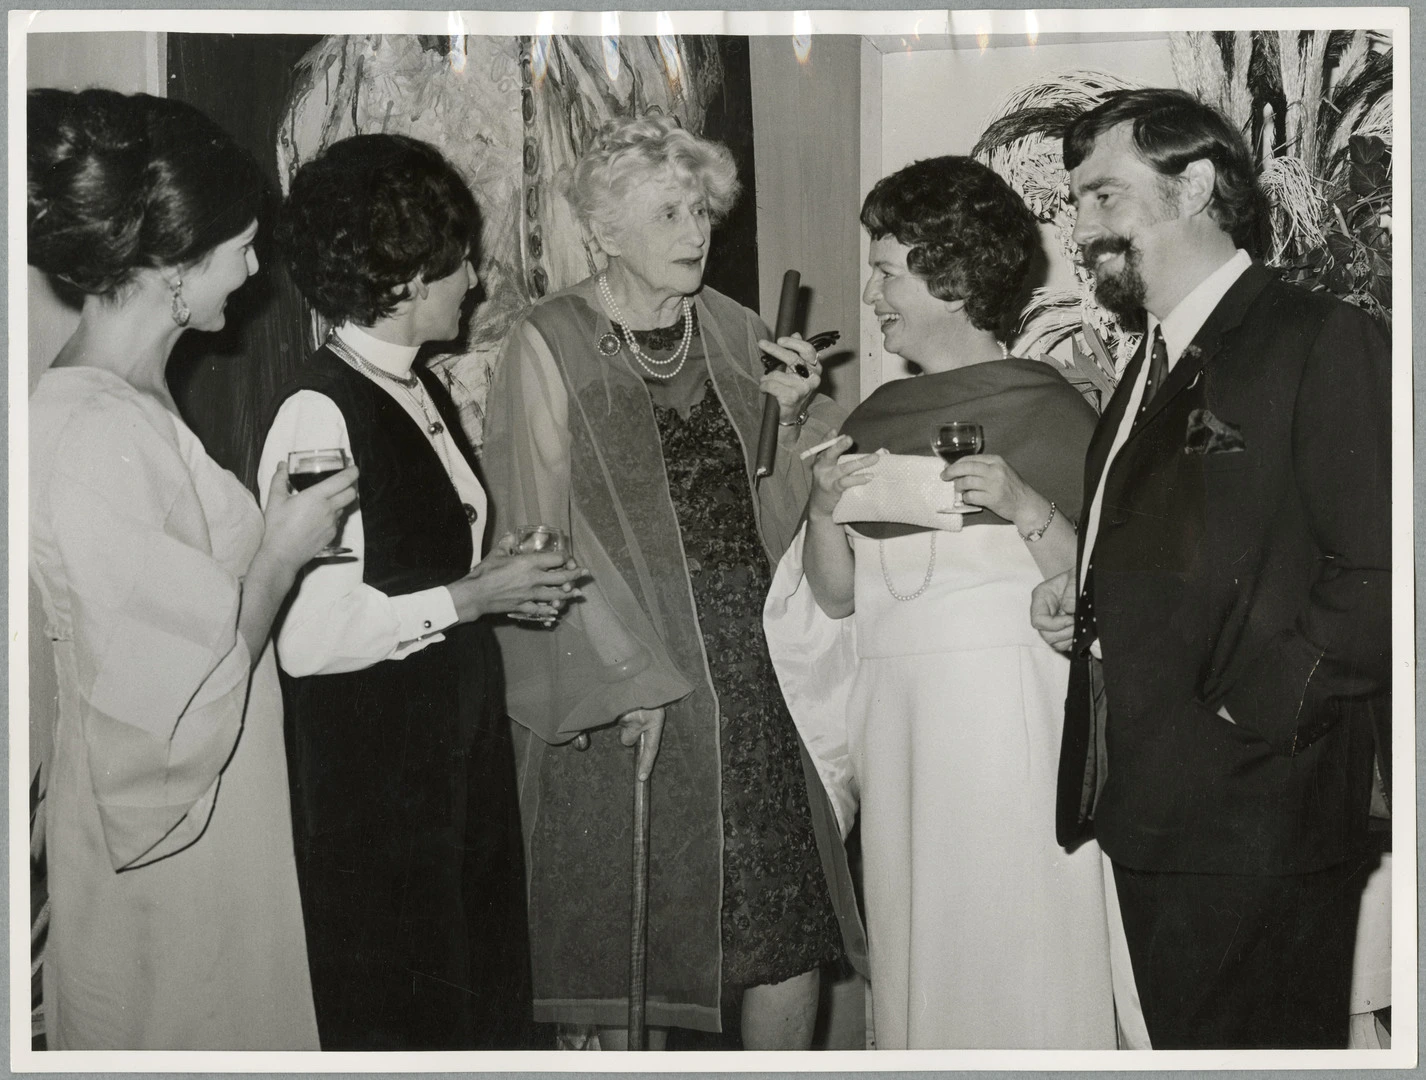 Ngaio Marsh with members of the Little Theatre Group